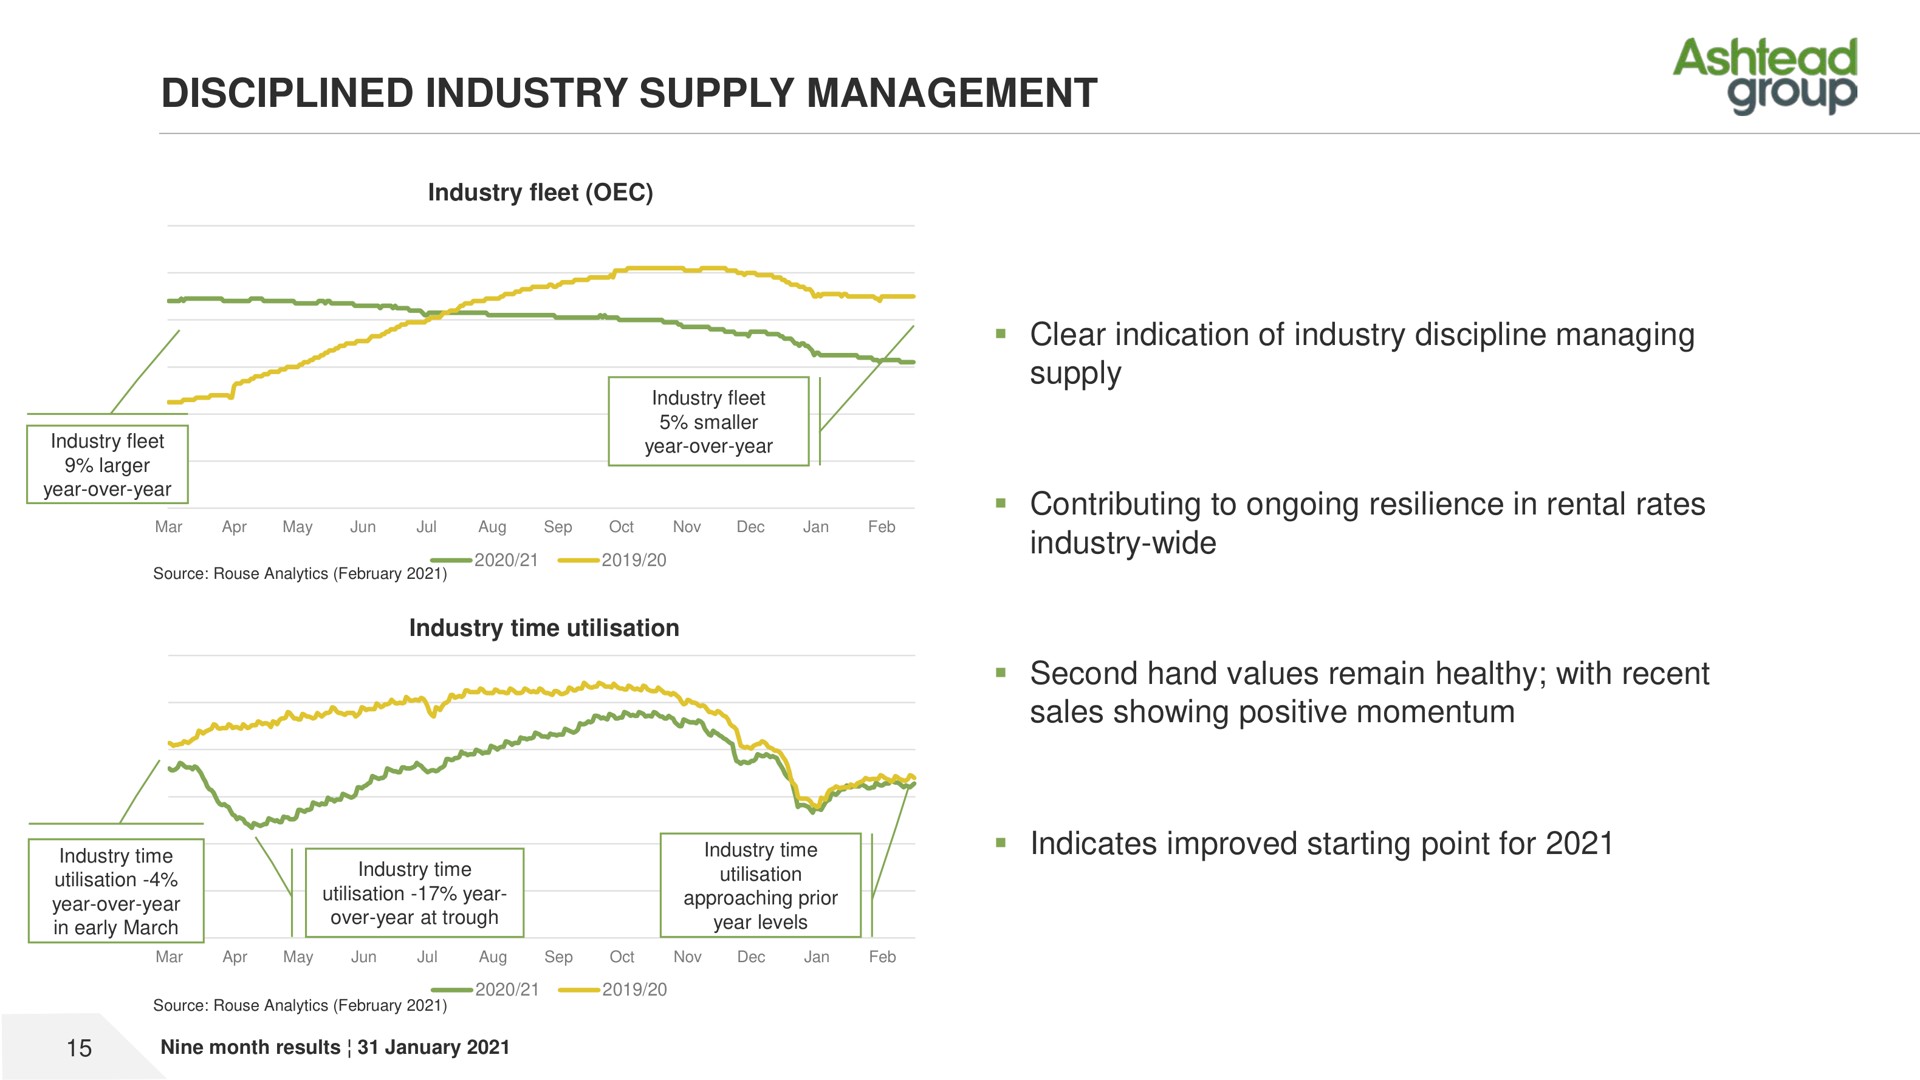 disciplined industry supply management clear indication of industry discipline managing supply contributing to ongoing resilience in rental rates industry wide second hand values remain healthy with recent sales showing positive momentum indicates improved starting point for group | Ashtead Group